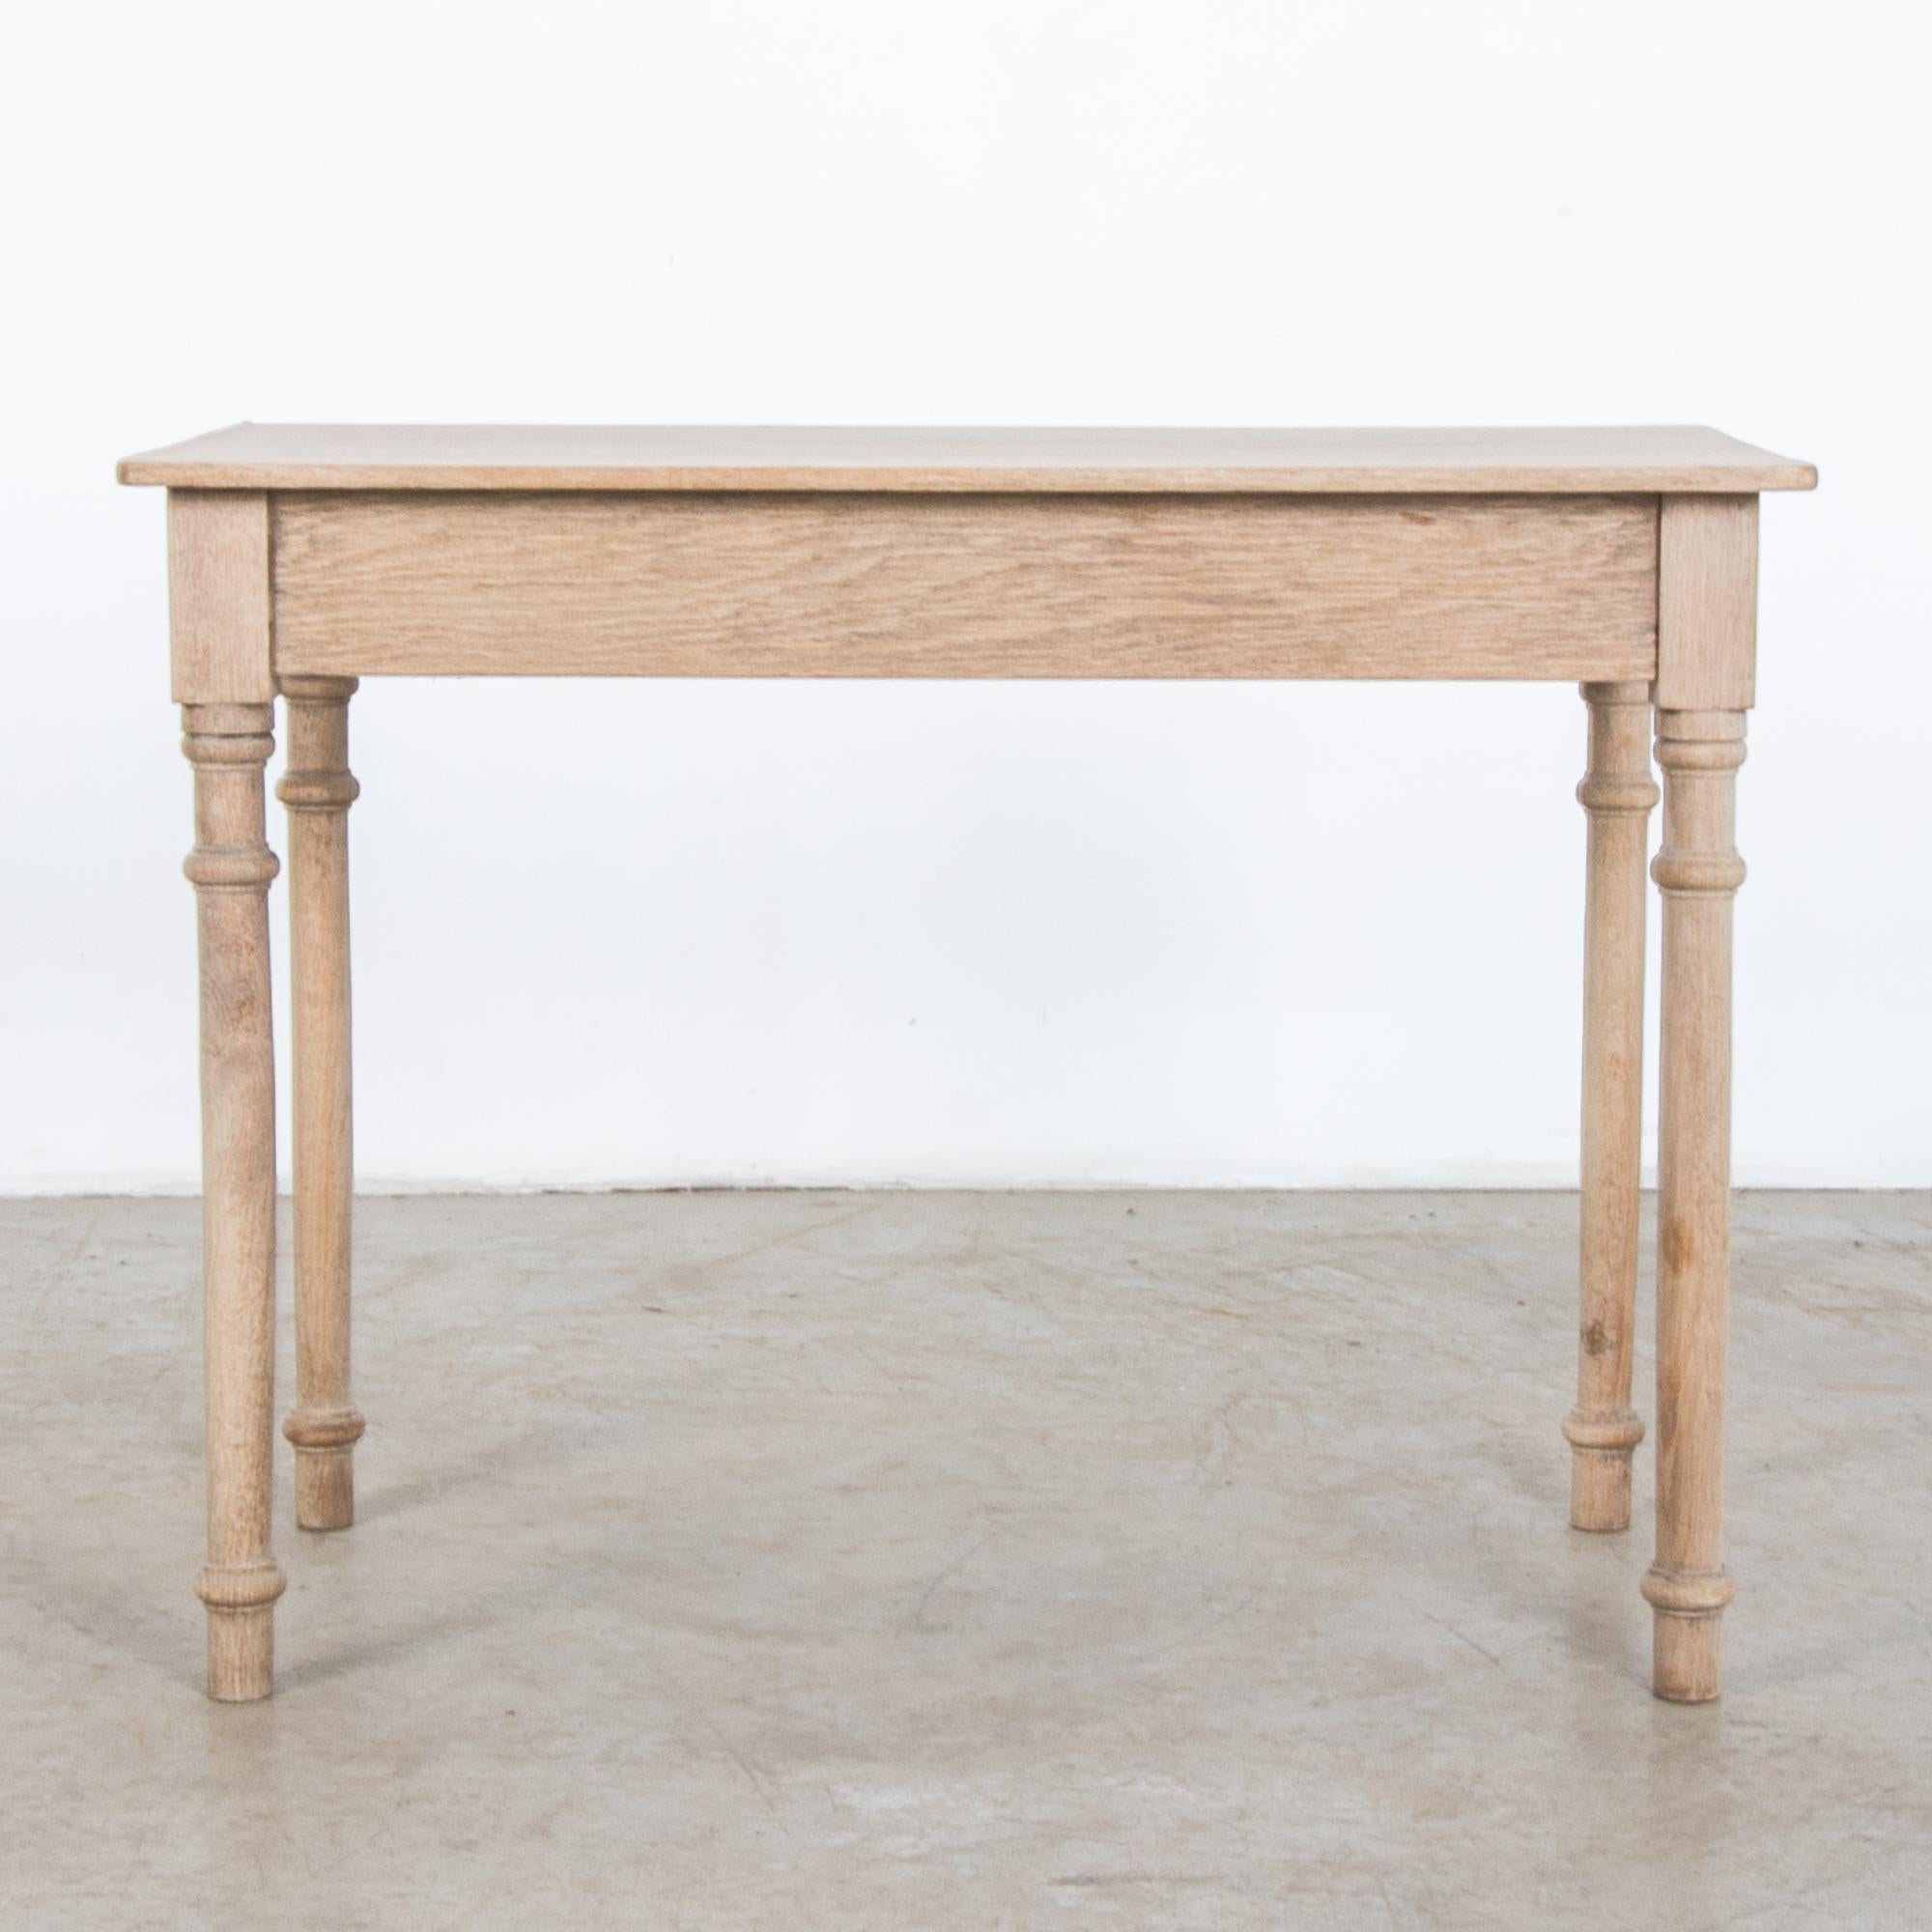 A simple oak table from Belgium, circa 1900. Rustic yet refined, this oak table is crafted after the traditions of local craftsmen. Away from the capital, carpenters interpreted the latest fashion in pared down styles, recalling their local ambiance